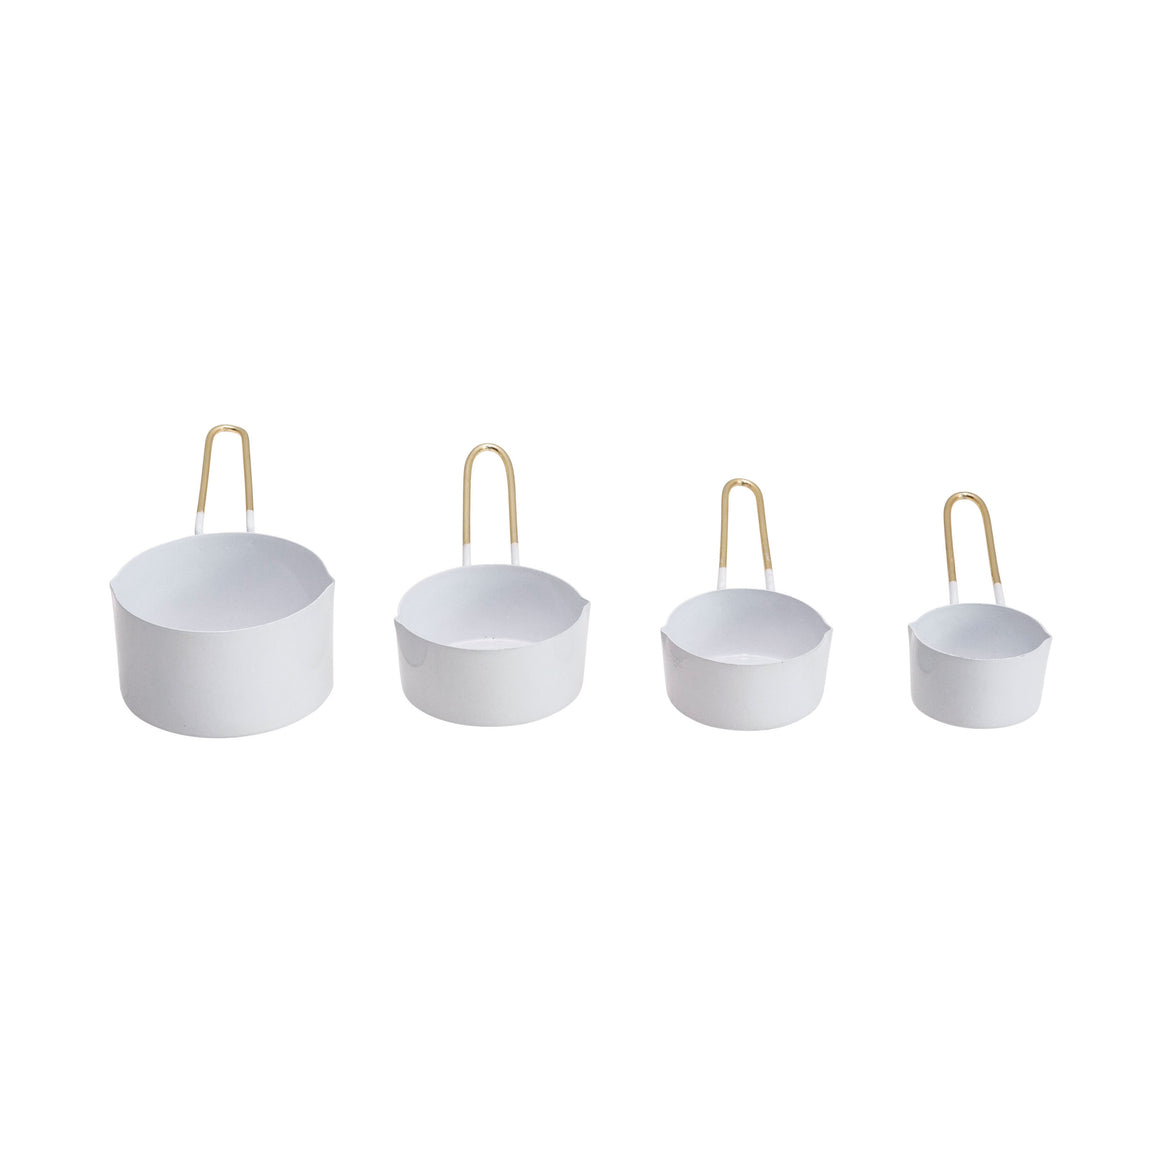 S/4 White w/Gold Finish Handles Enameled Measuring Cups